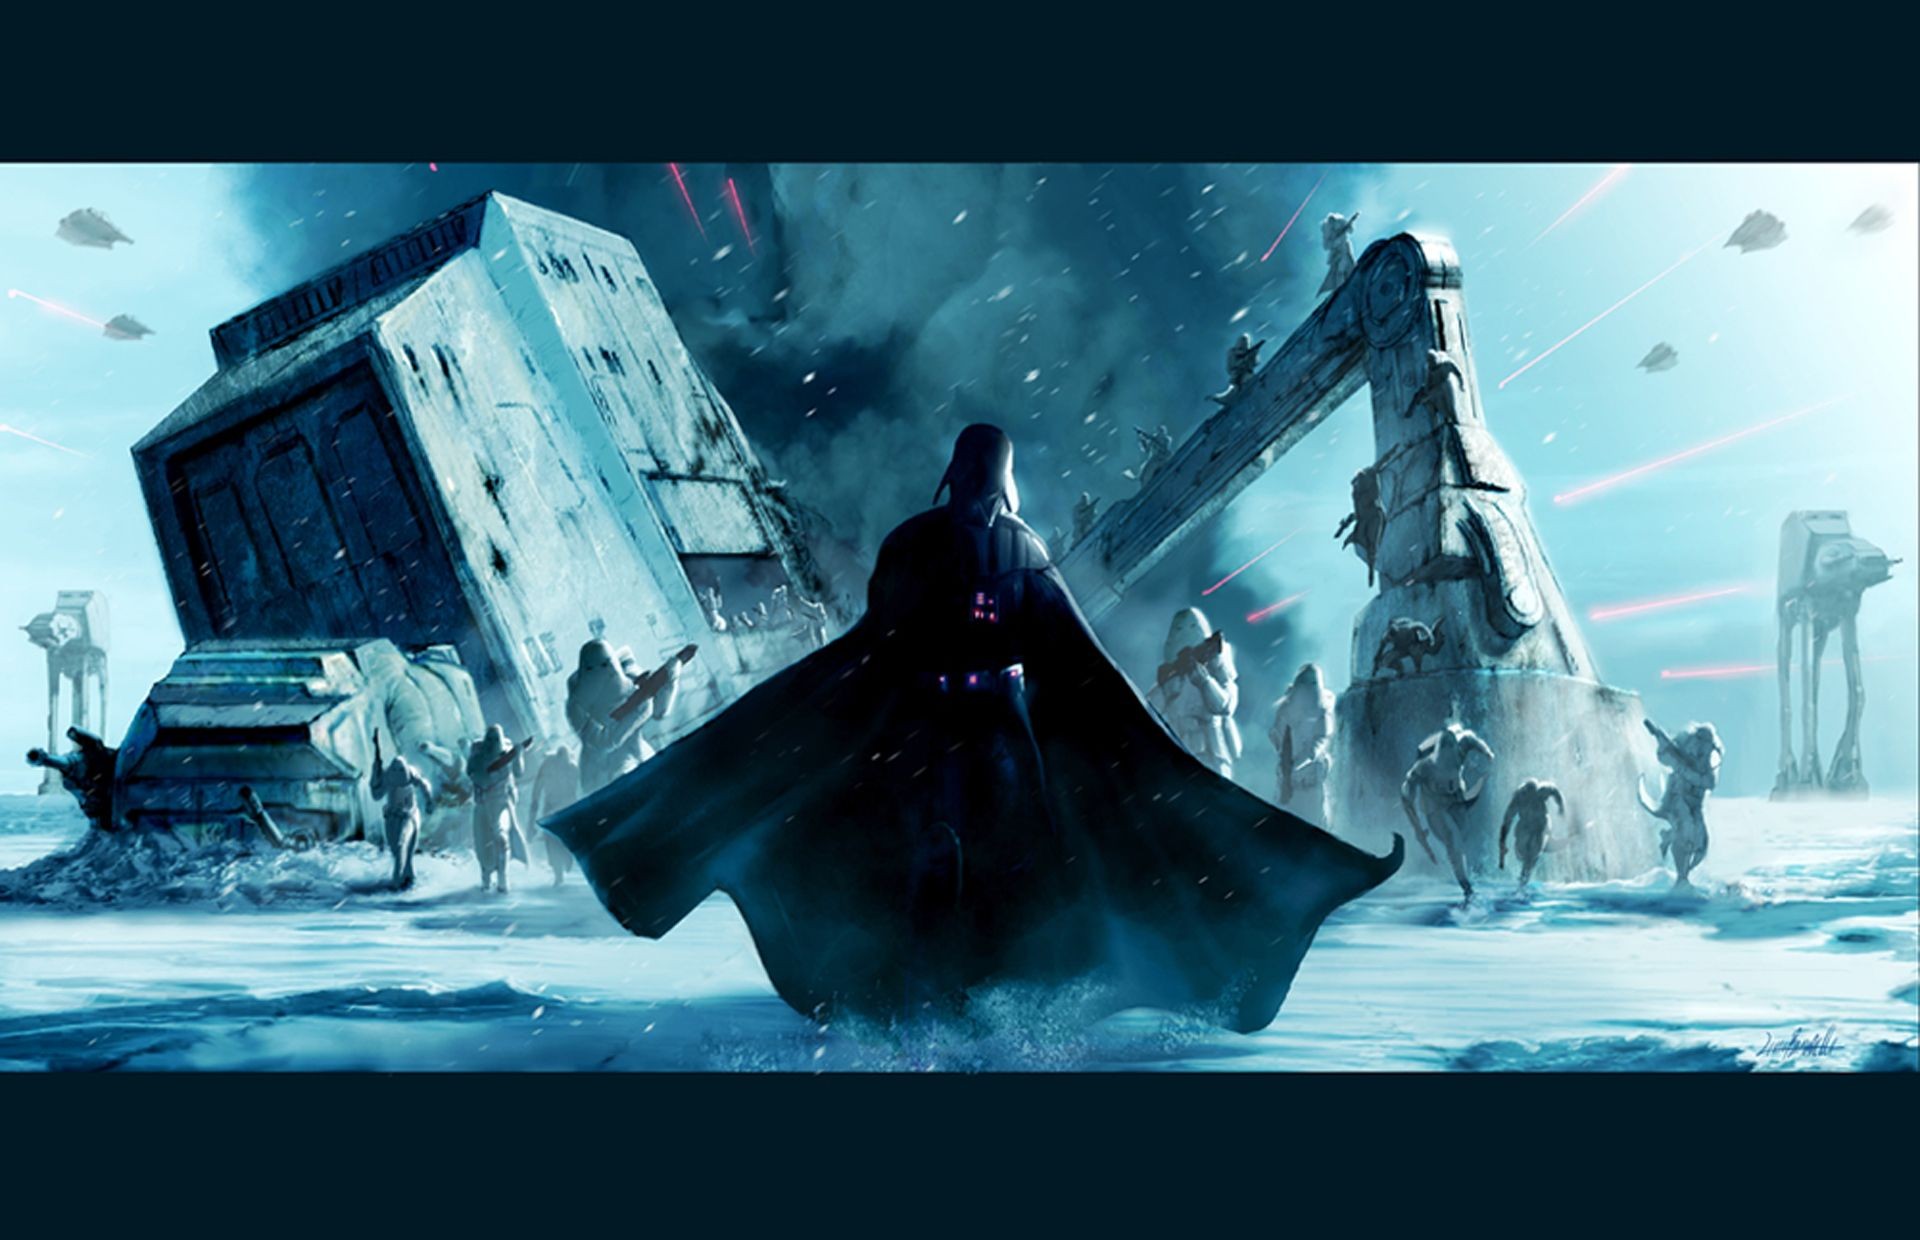 Darth Vader Imperial Forces Hoth Battle Sith Star Wars Villains 1920x1240